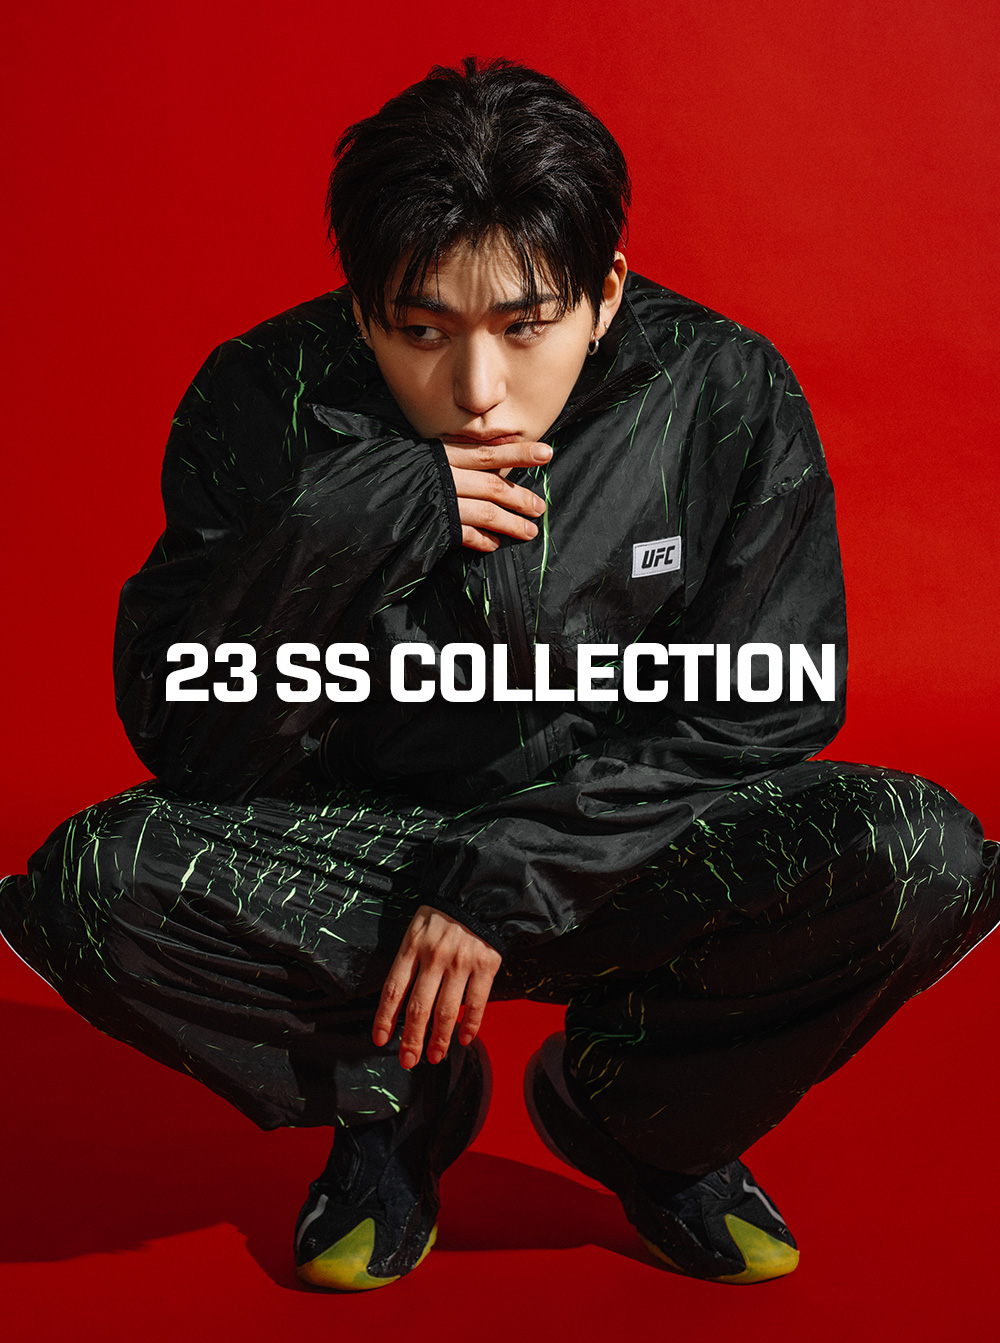 23 SS COLLECTION